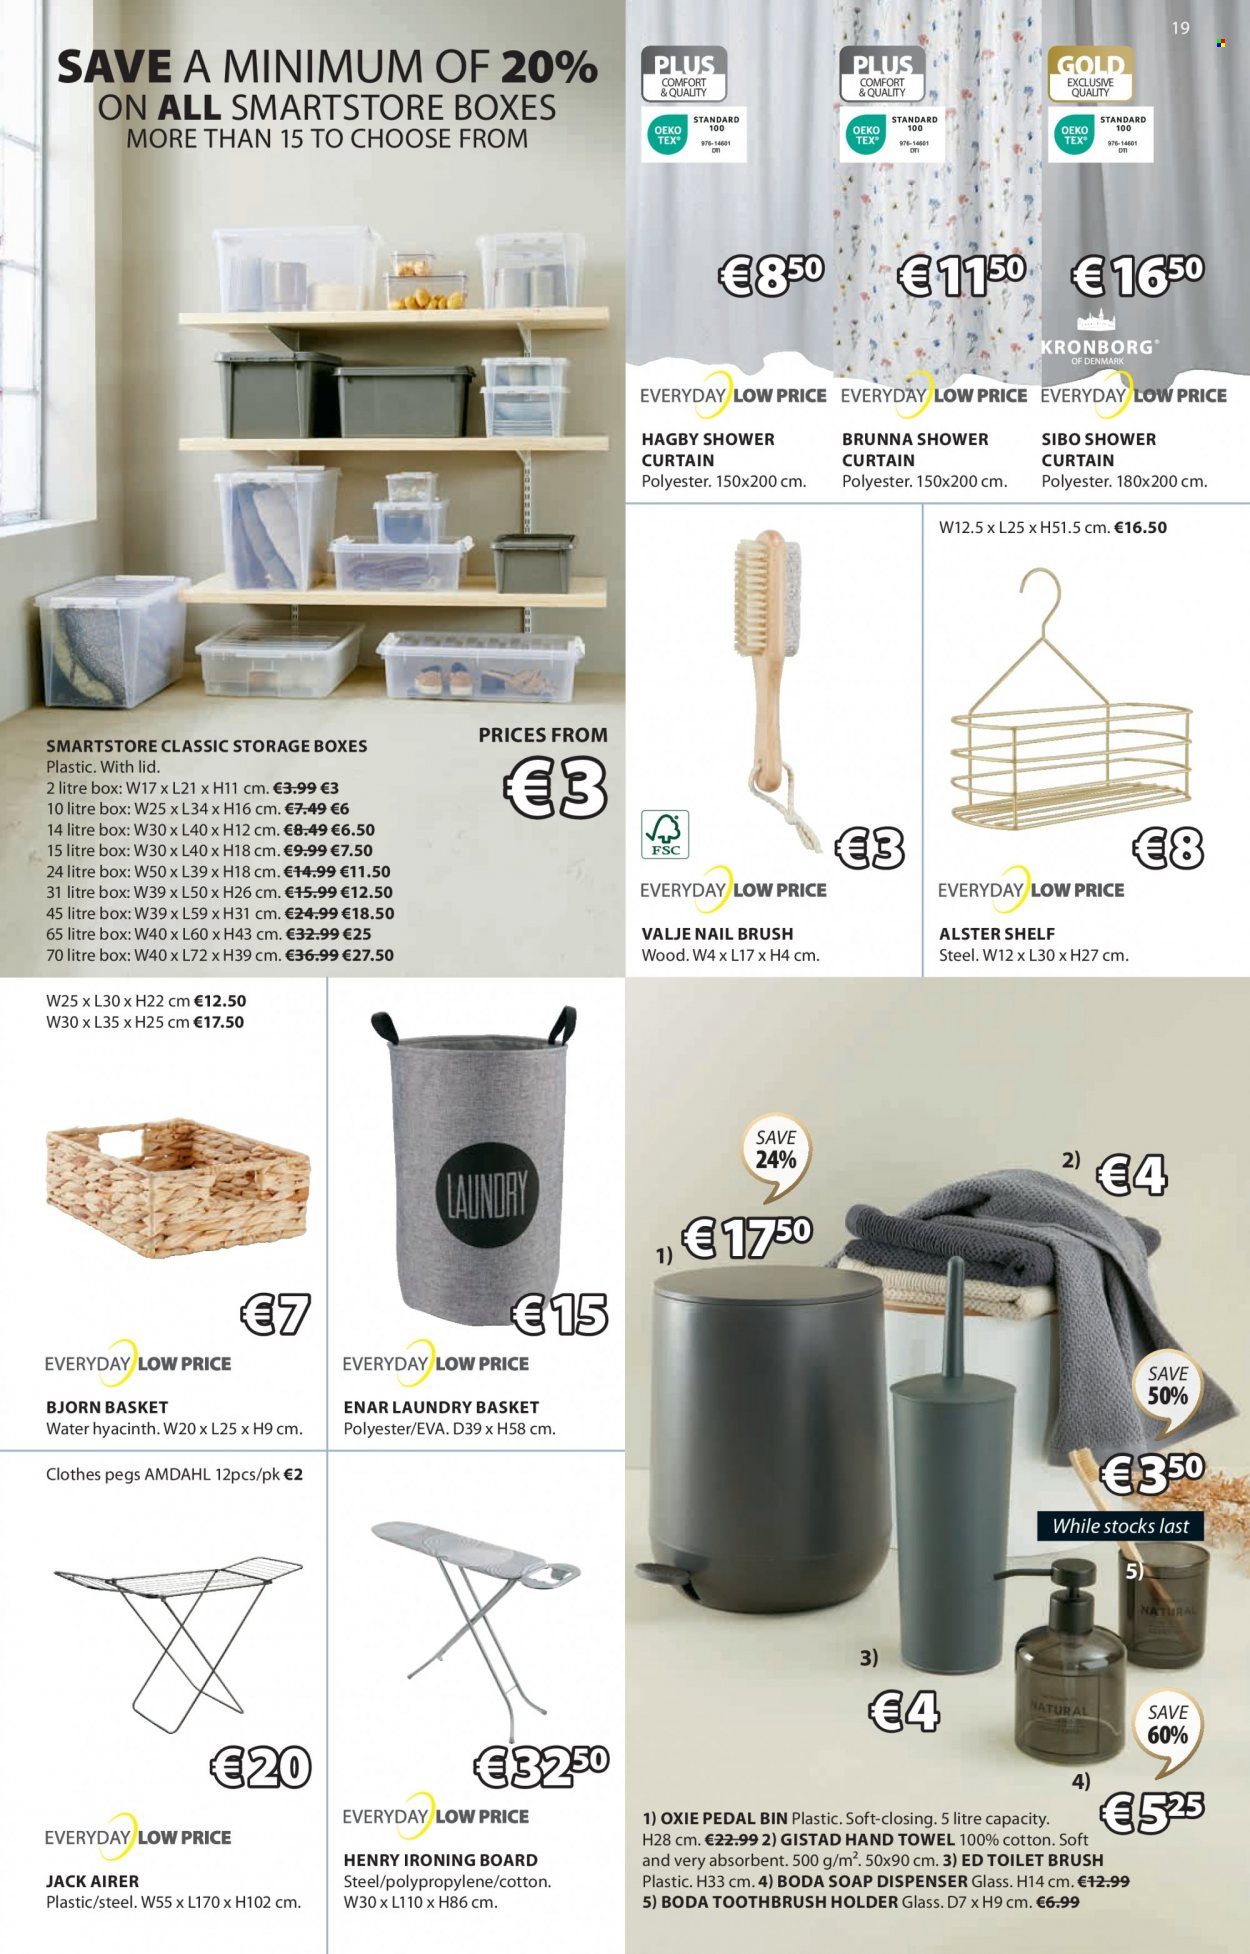 thumbnail - JYSK offer  - 01.06.2023 - 05.07.2023 - Sales products - storage box, shelves, bin, holder, ironing board, clothes peg, airer, laundry basket, shower curtain, soap dispenser, toilet brush, toothbrush holder, dispenser, curtain, towel, hand towel, water hyacinth. Page 19.